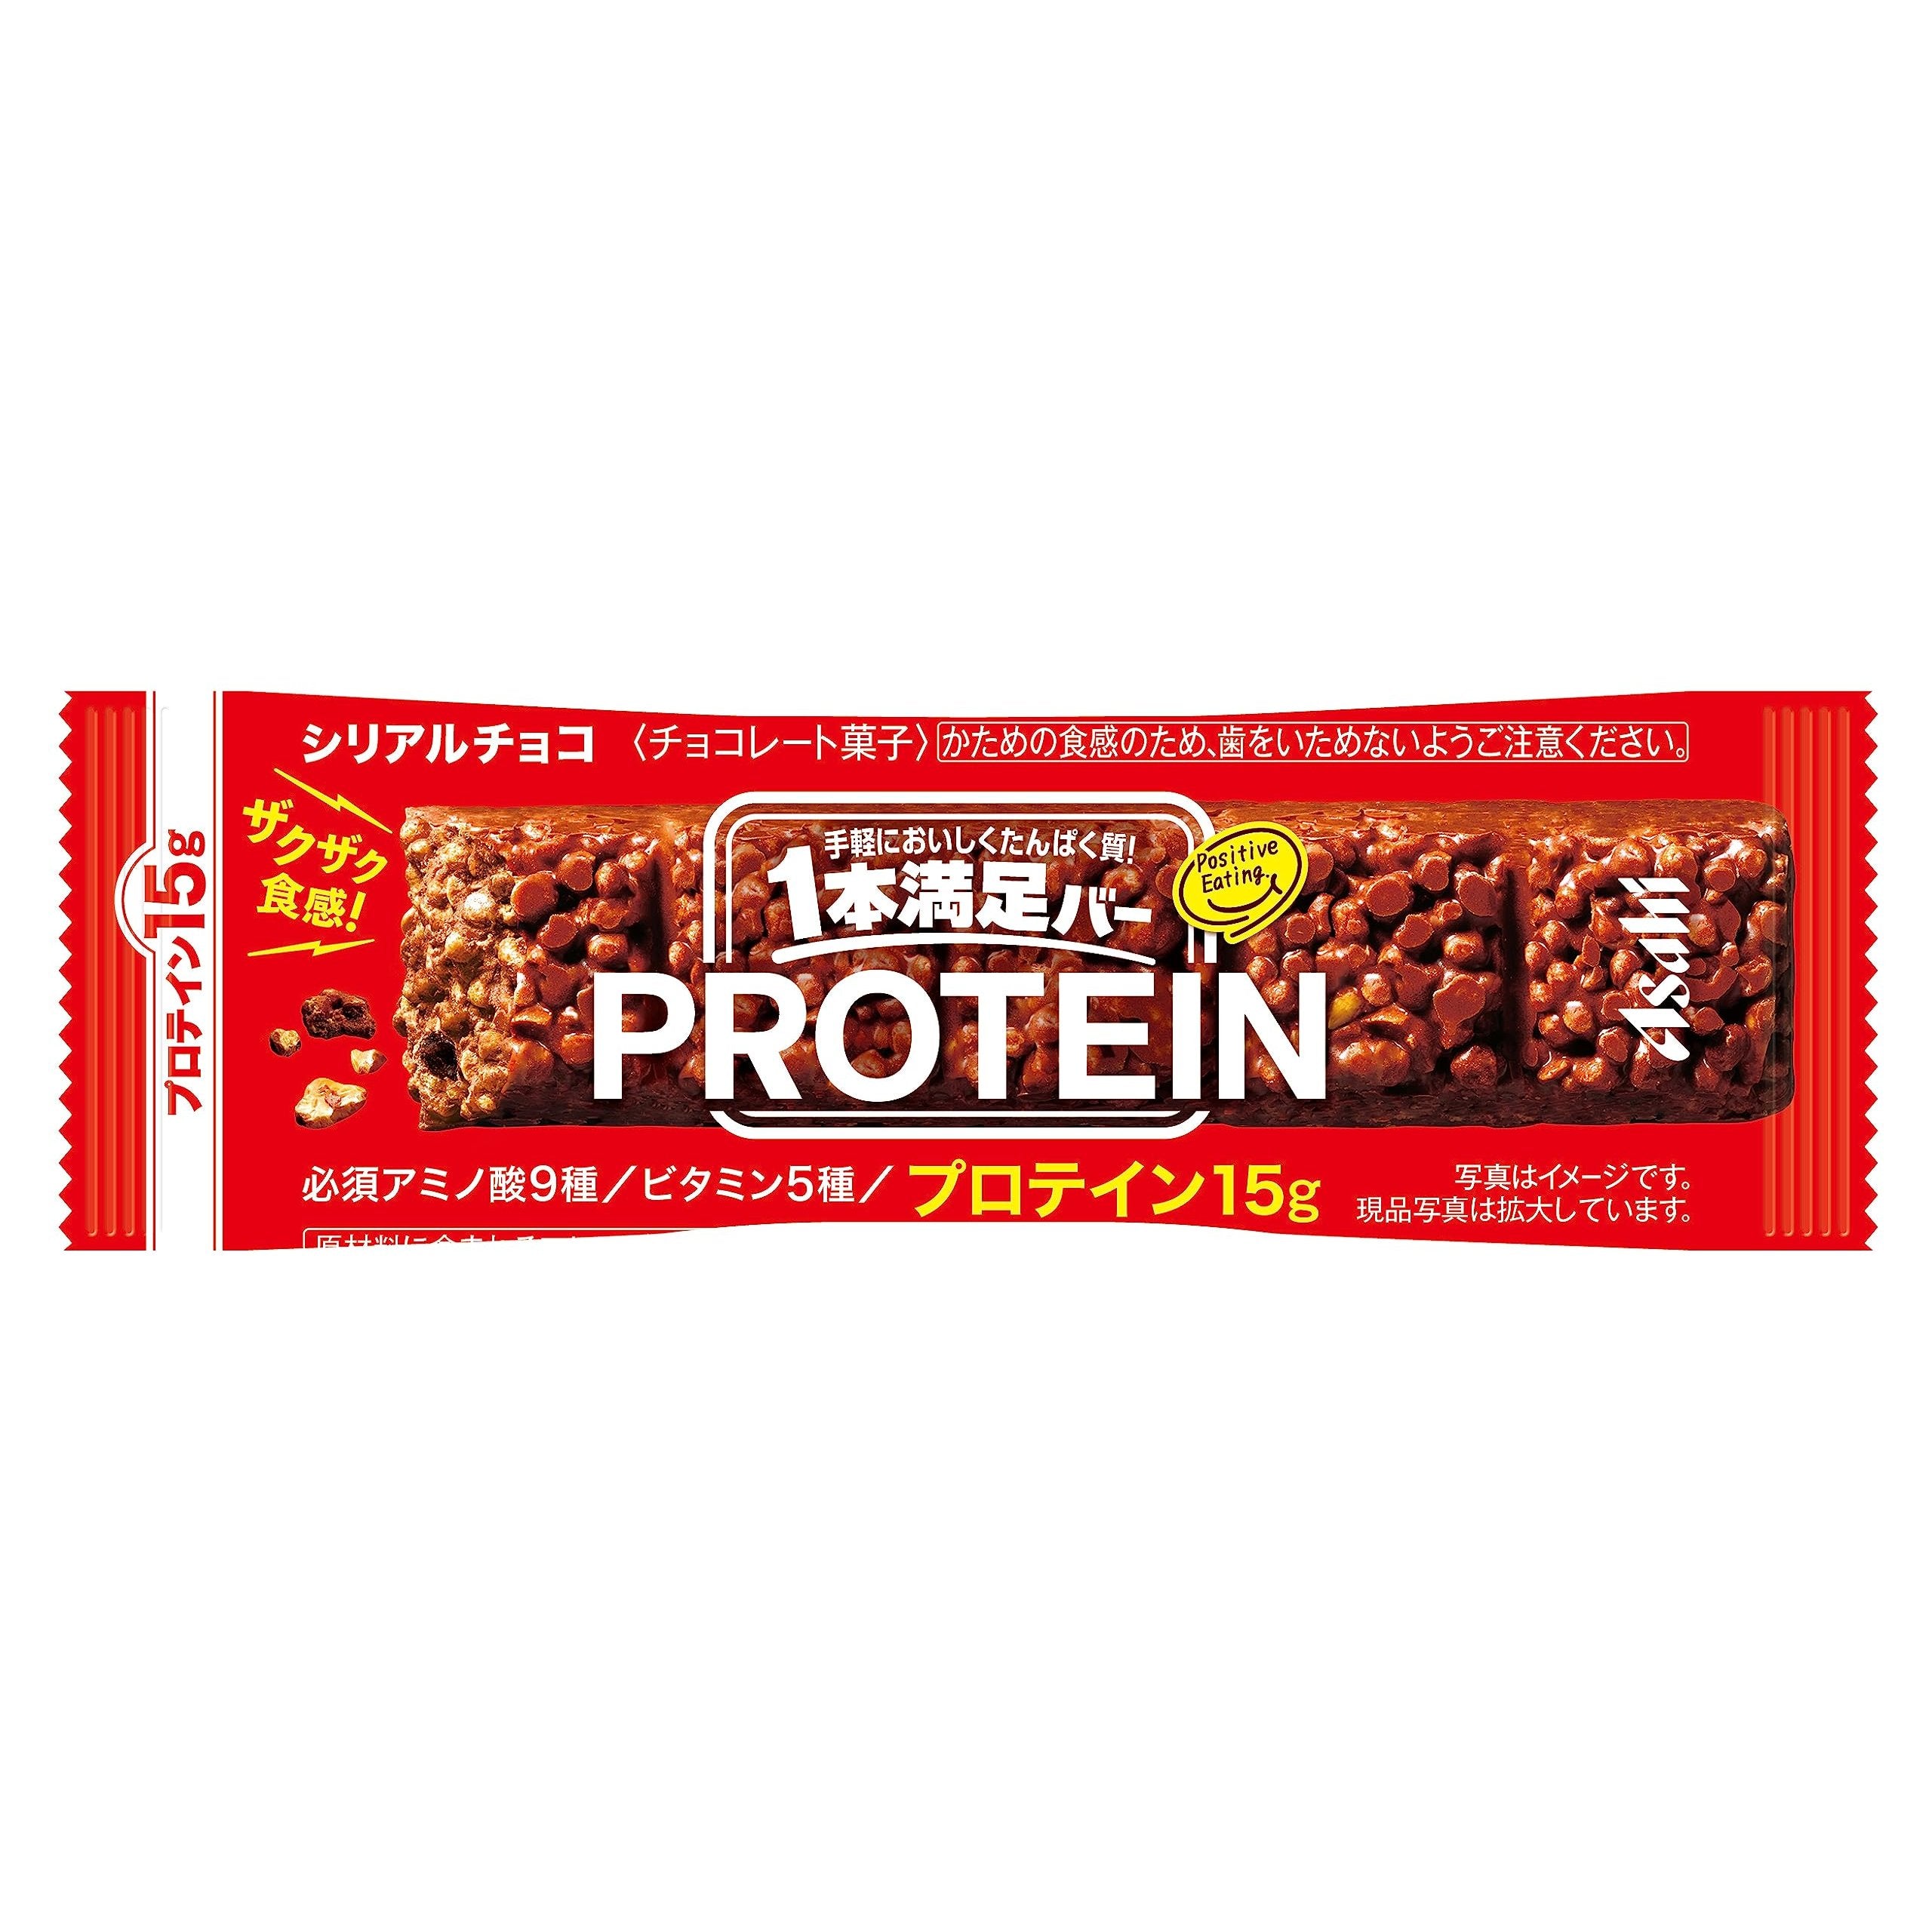 Asahi-Protein-Bar-Chocolate-Flavor-Cereal-Bar-15g-of-Protein--Pack-of-9--1-2023-12-12T00:46:17.545Z.jpg